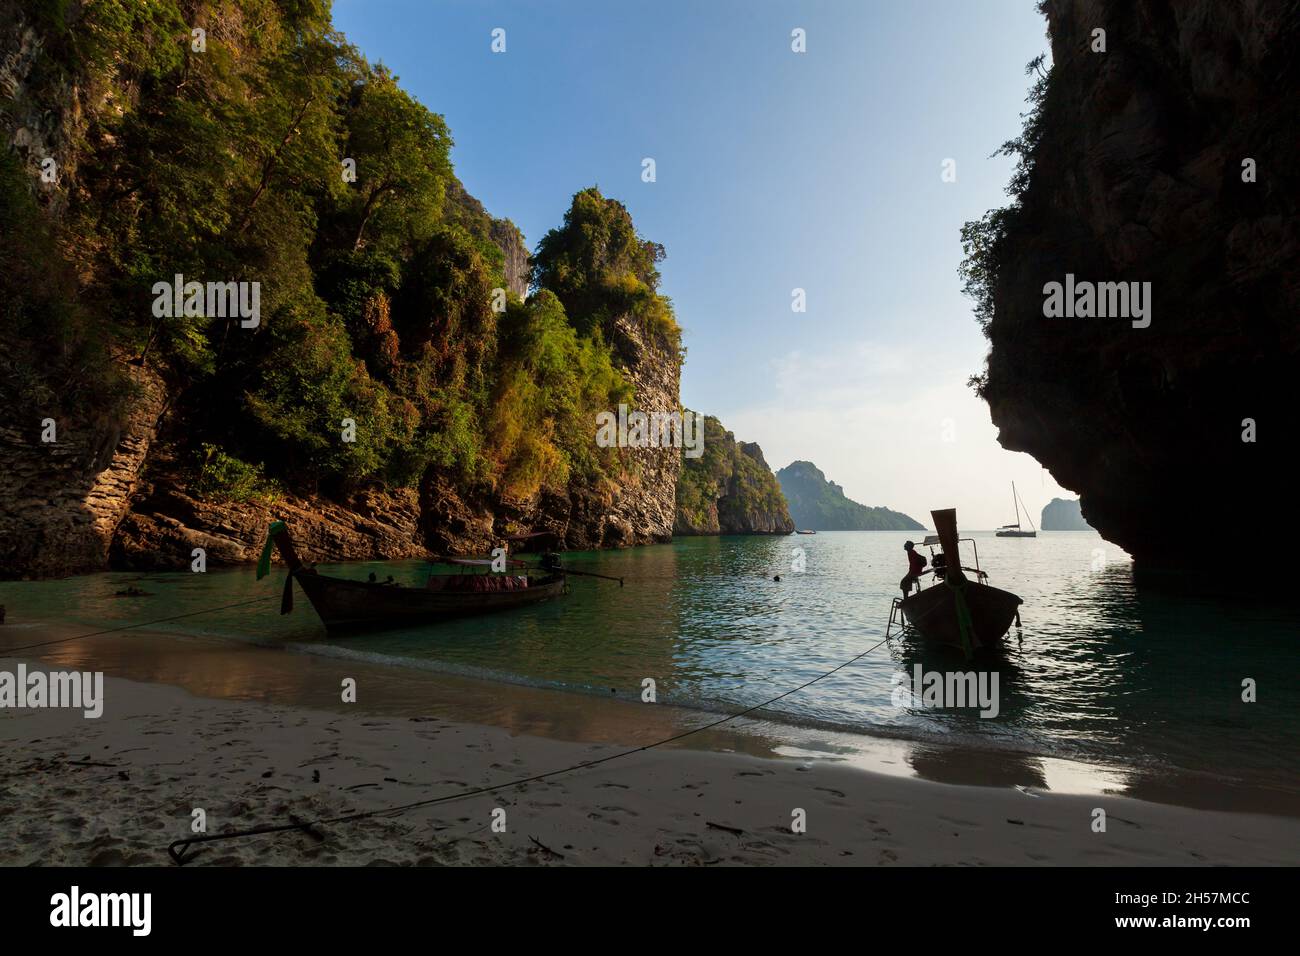 Coastline of thailand gulf with mountains rising from sea. Stock Photo